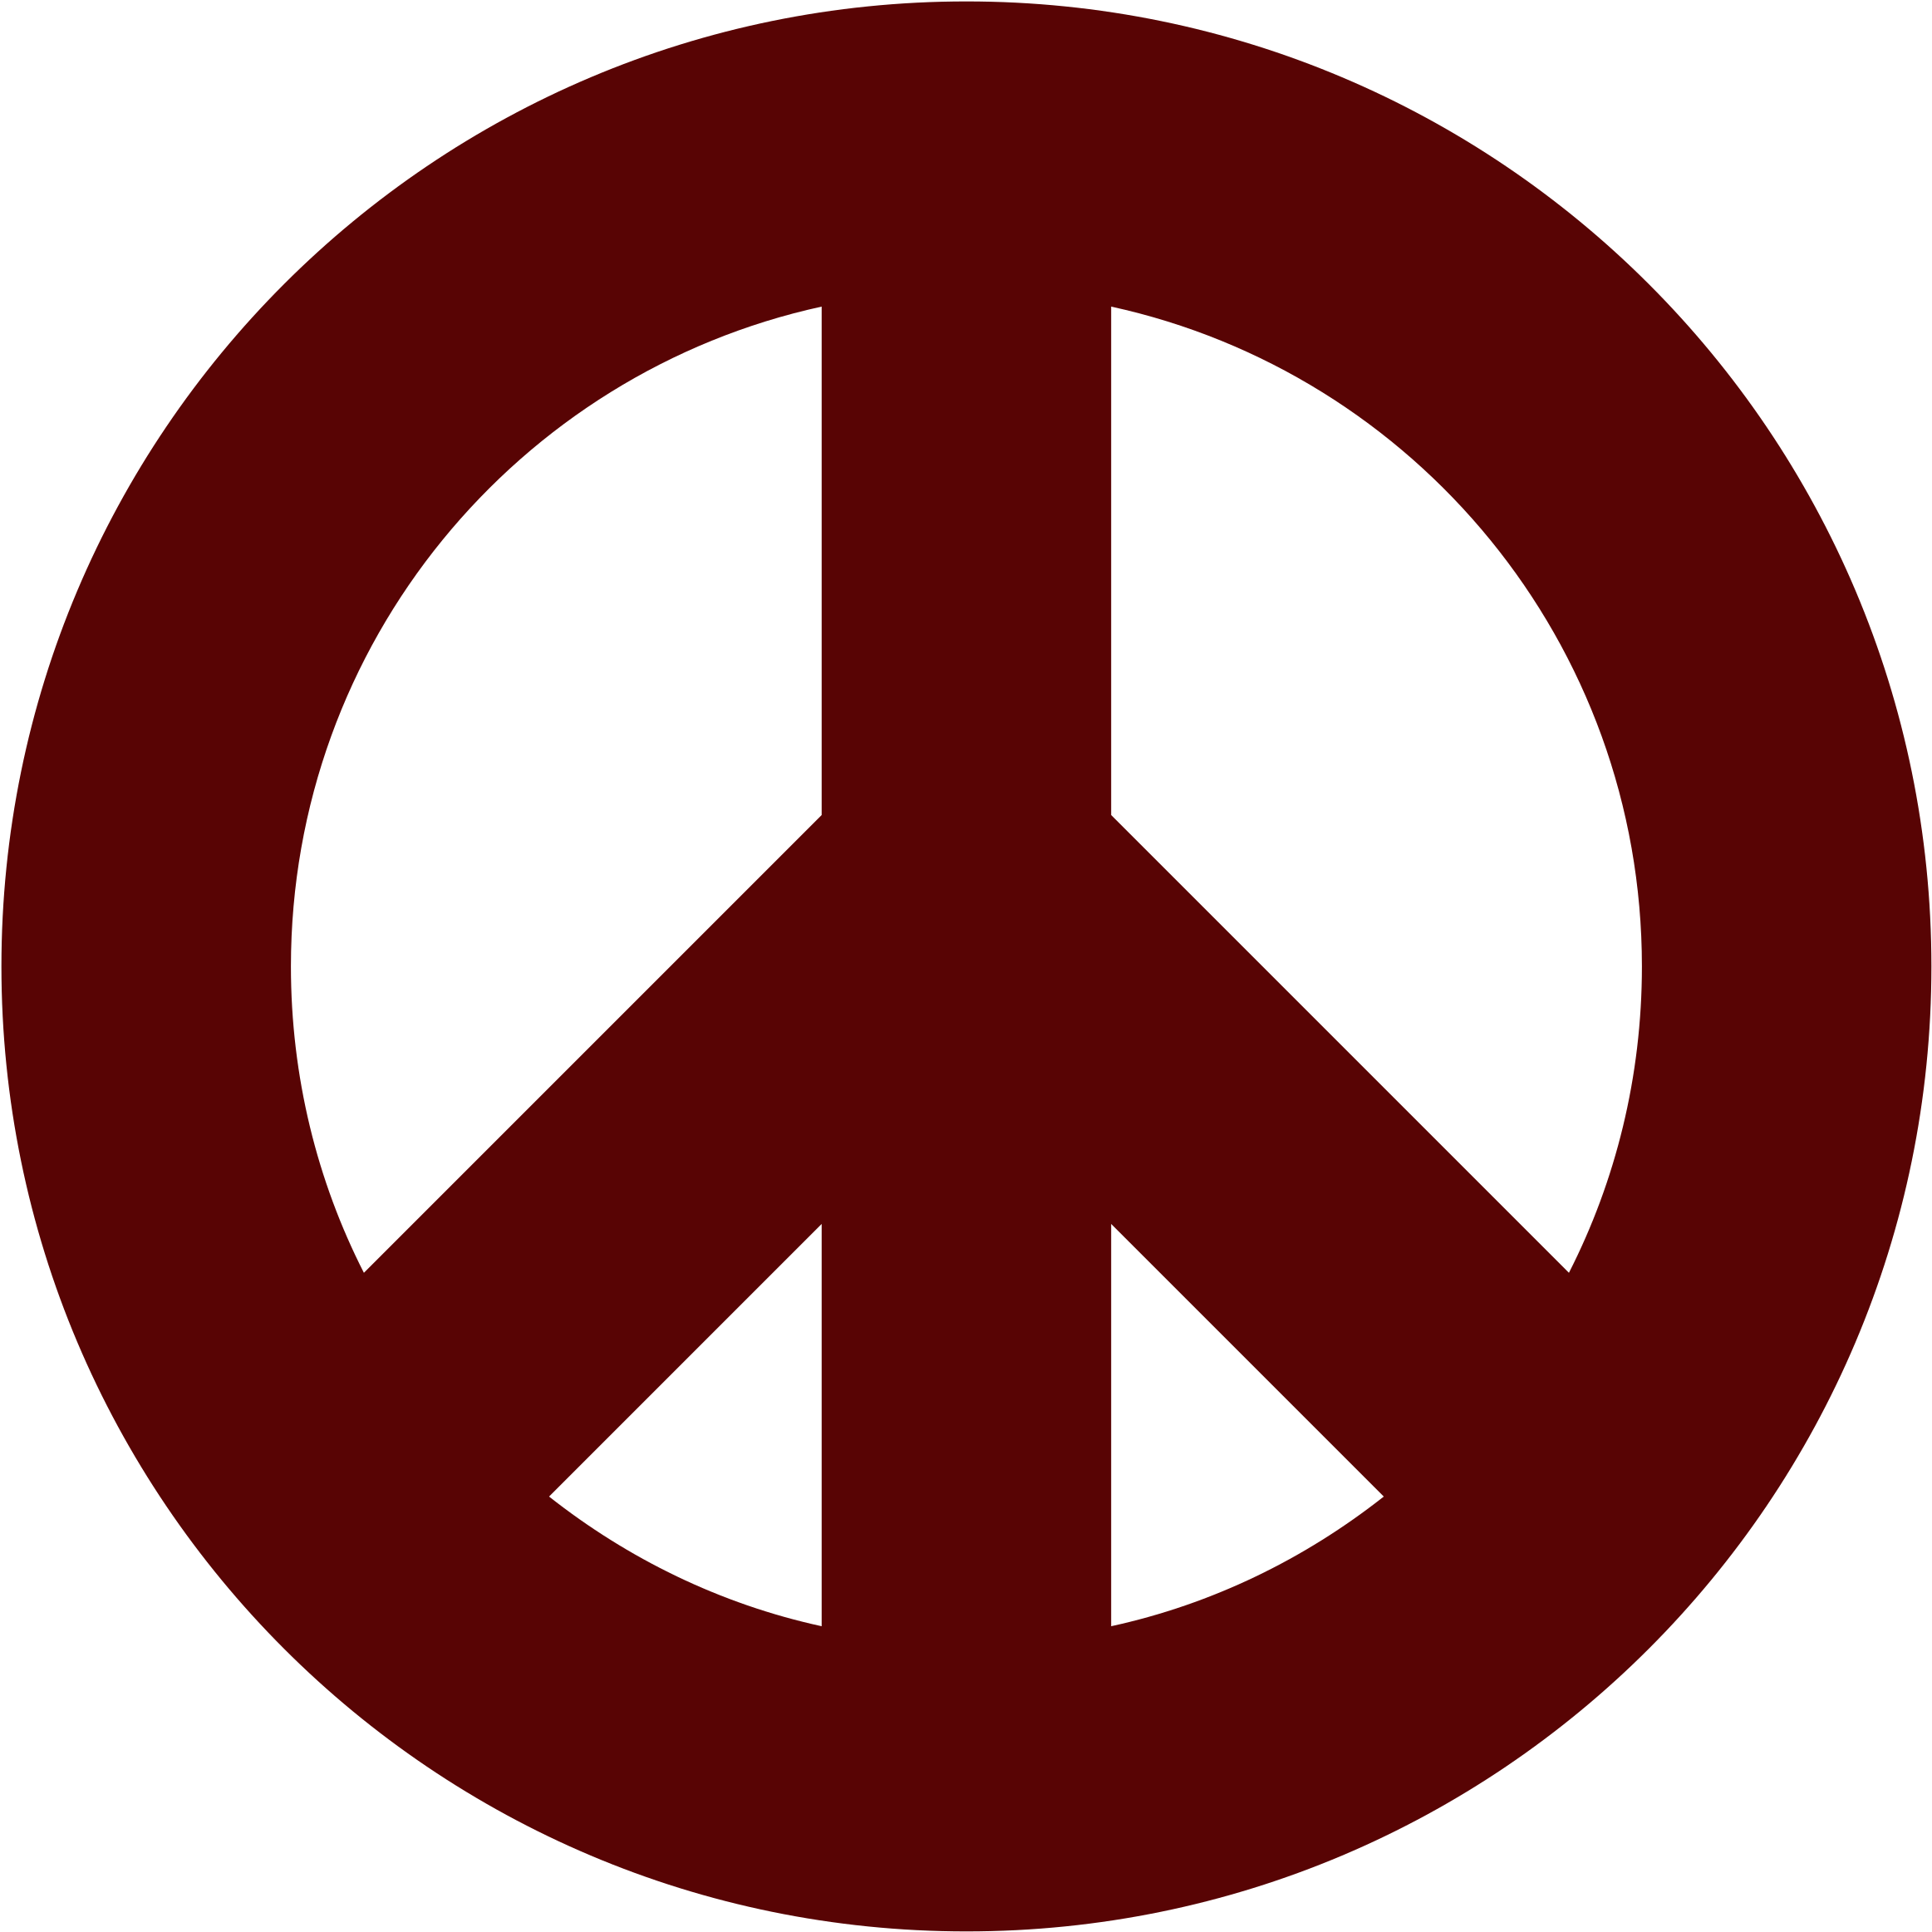 A Red Peace Sign With Black Background